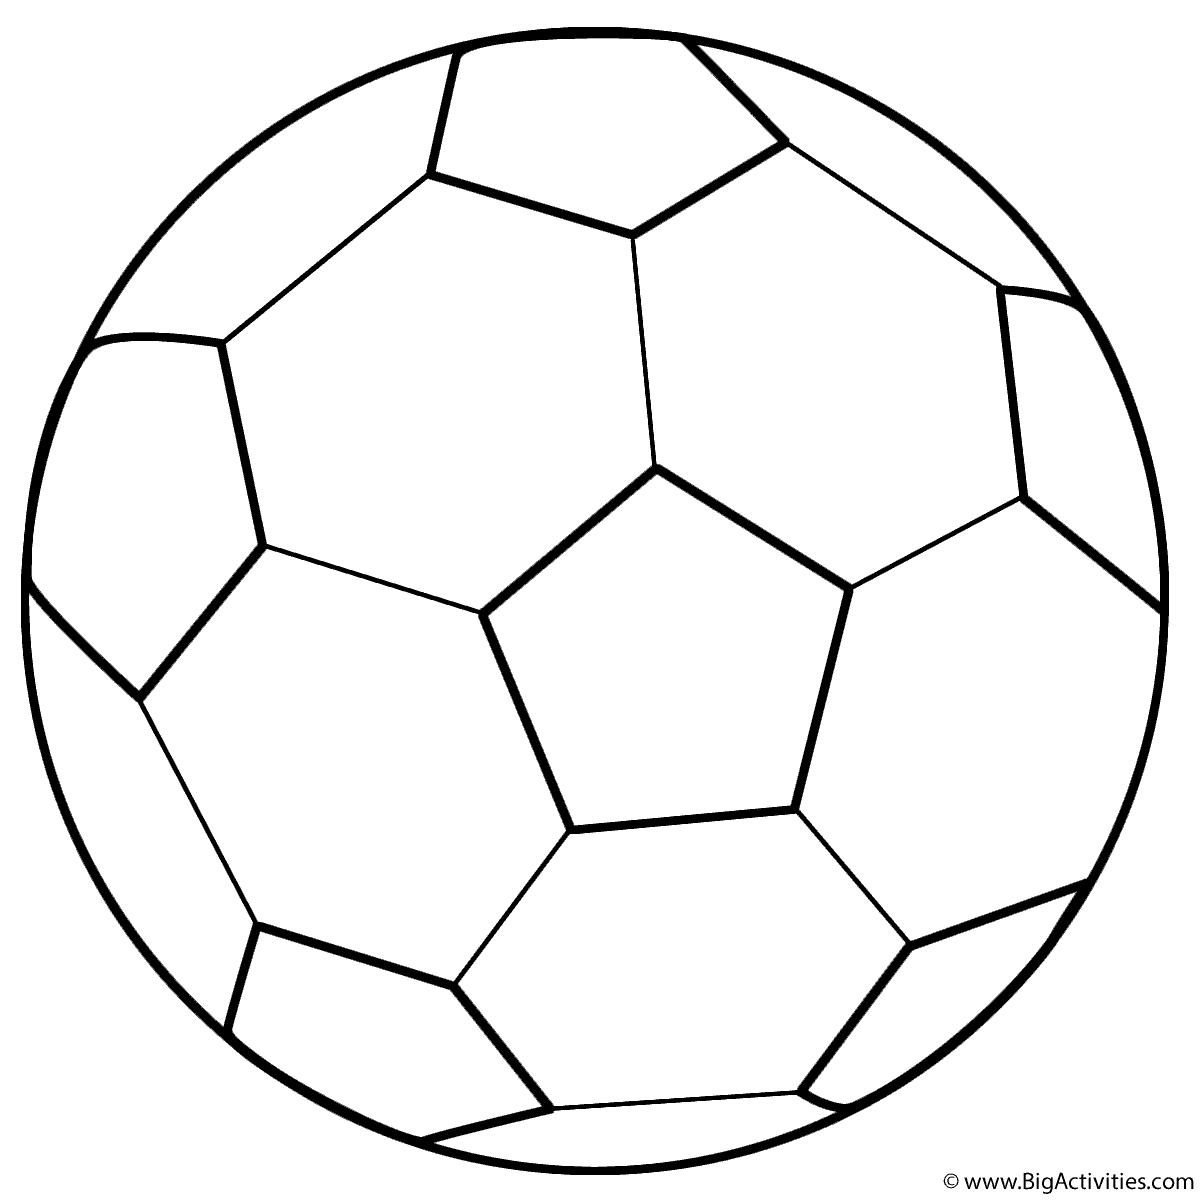 Download Soccer Ball - Coloring Page (Sports)